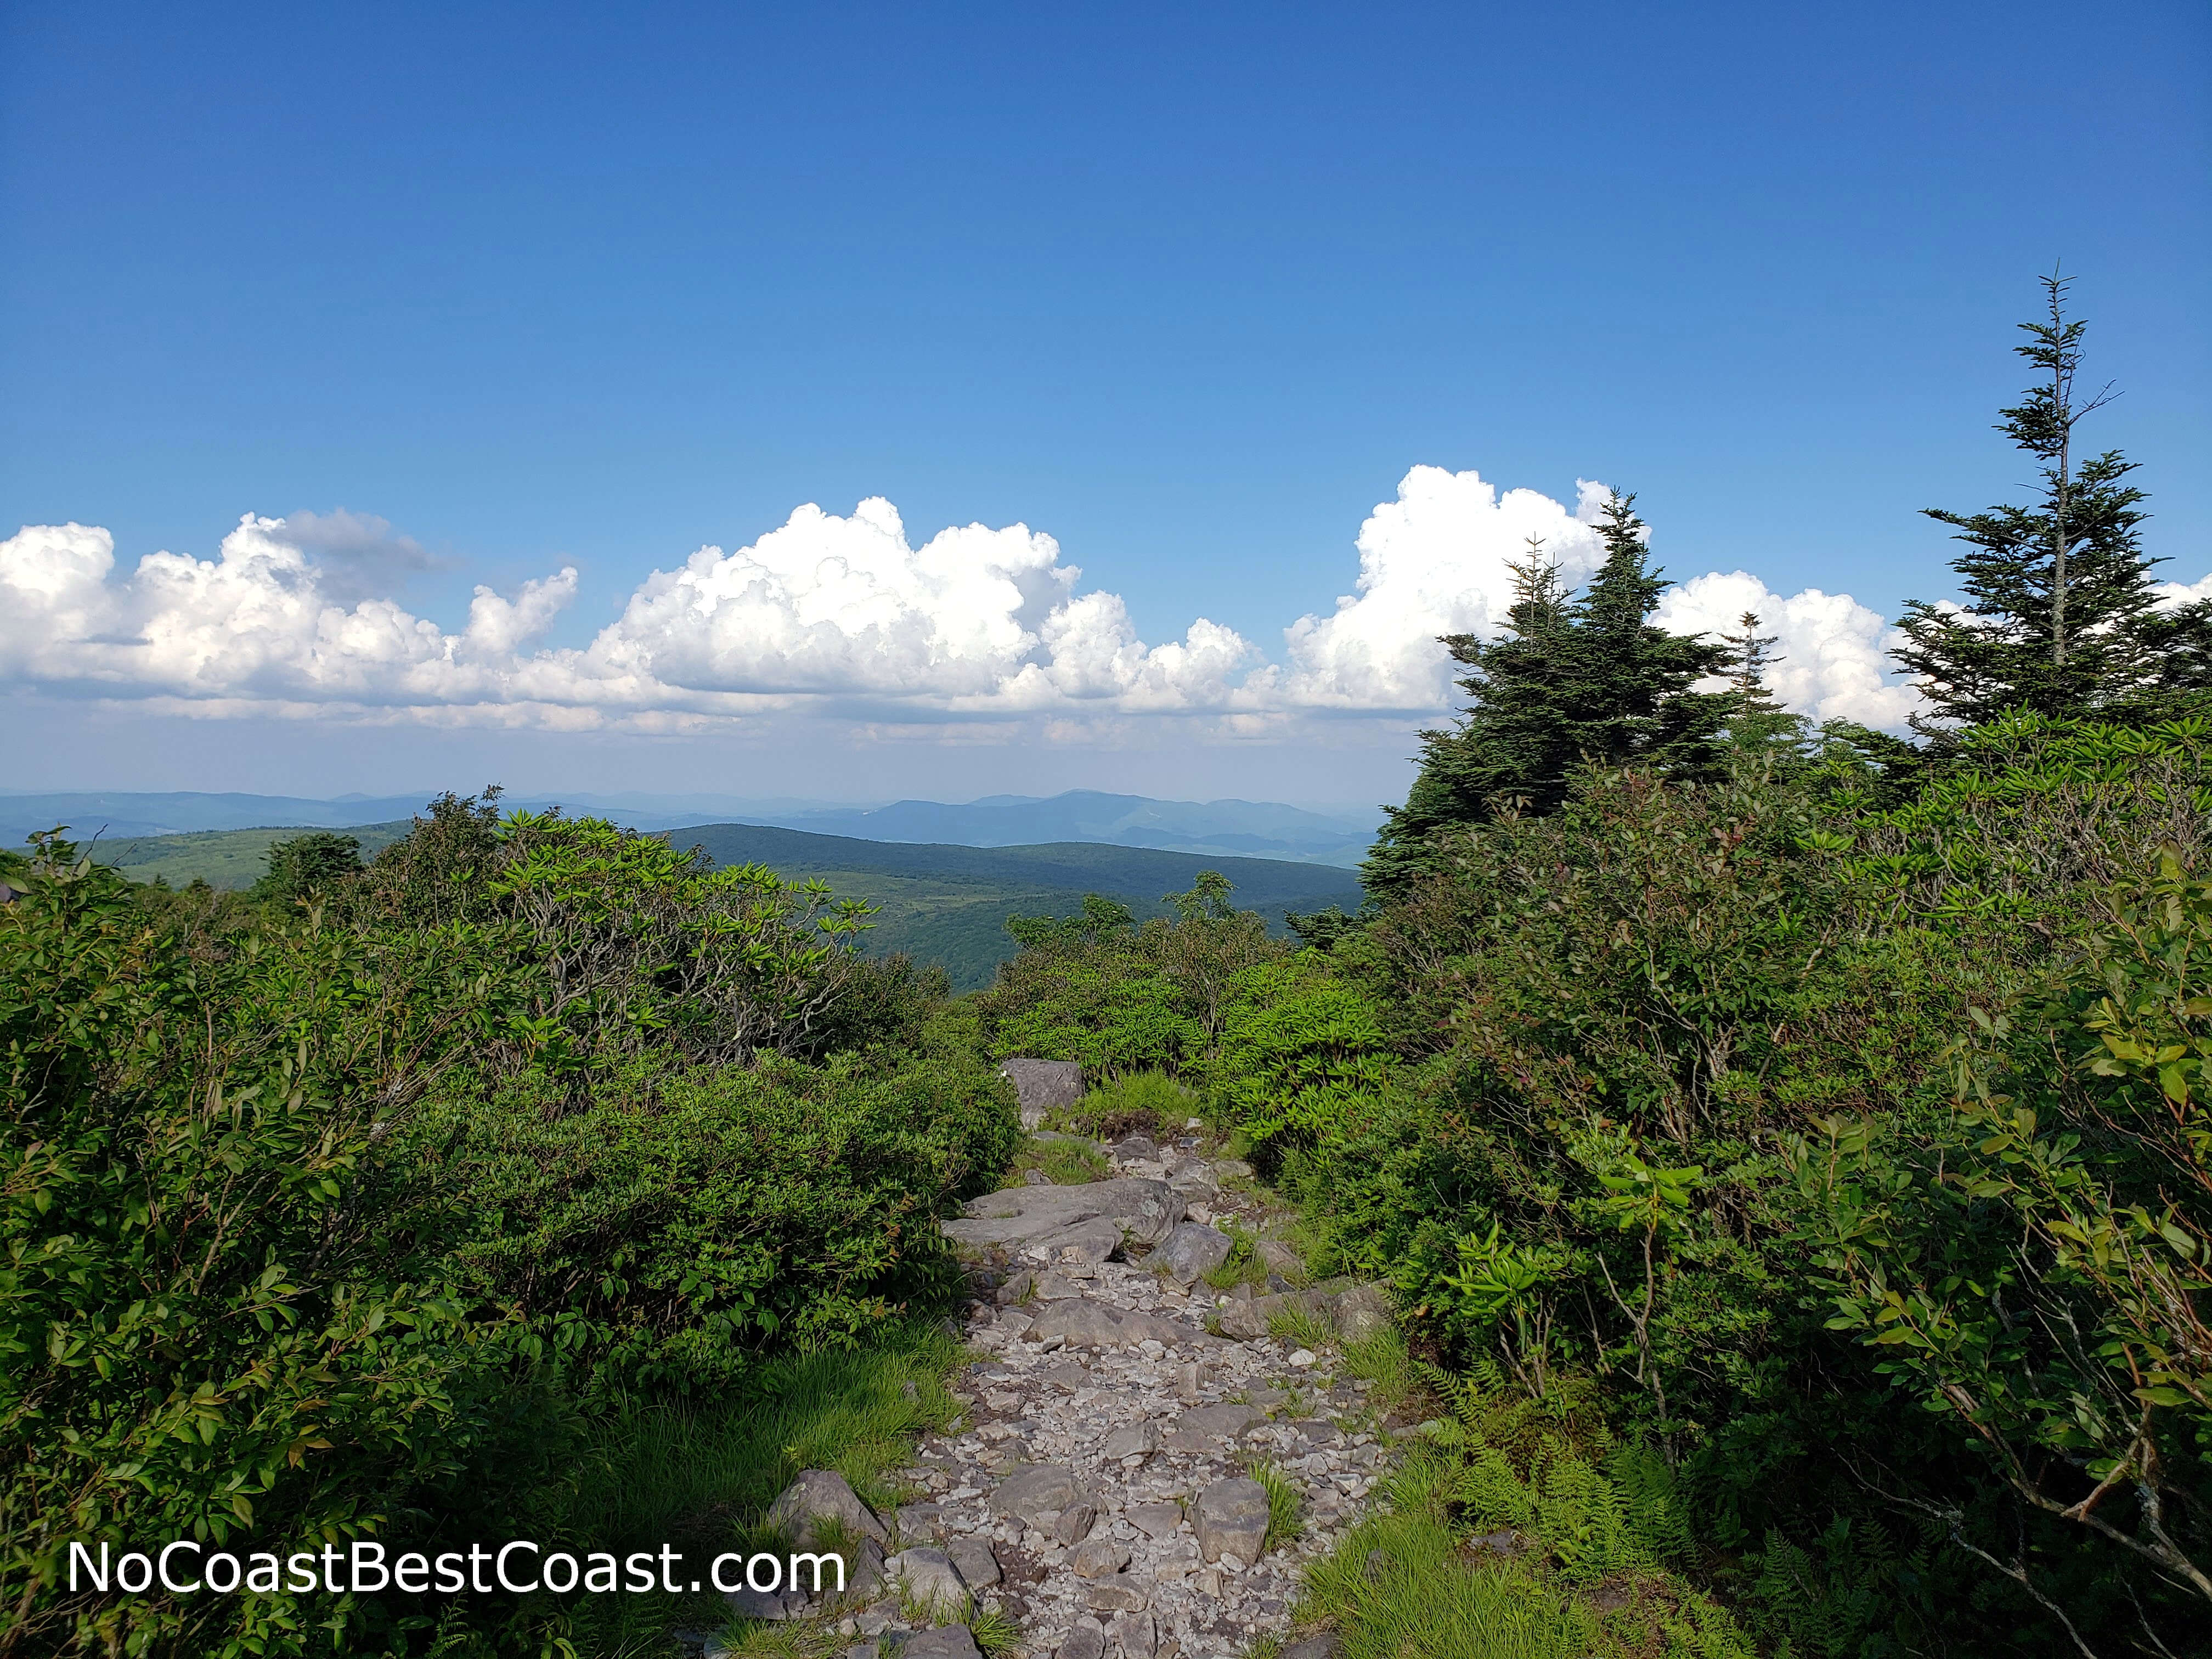 This section of the Appalachian Trail makes you feel like you're on top of the world